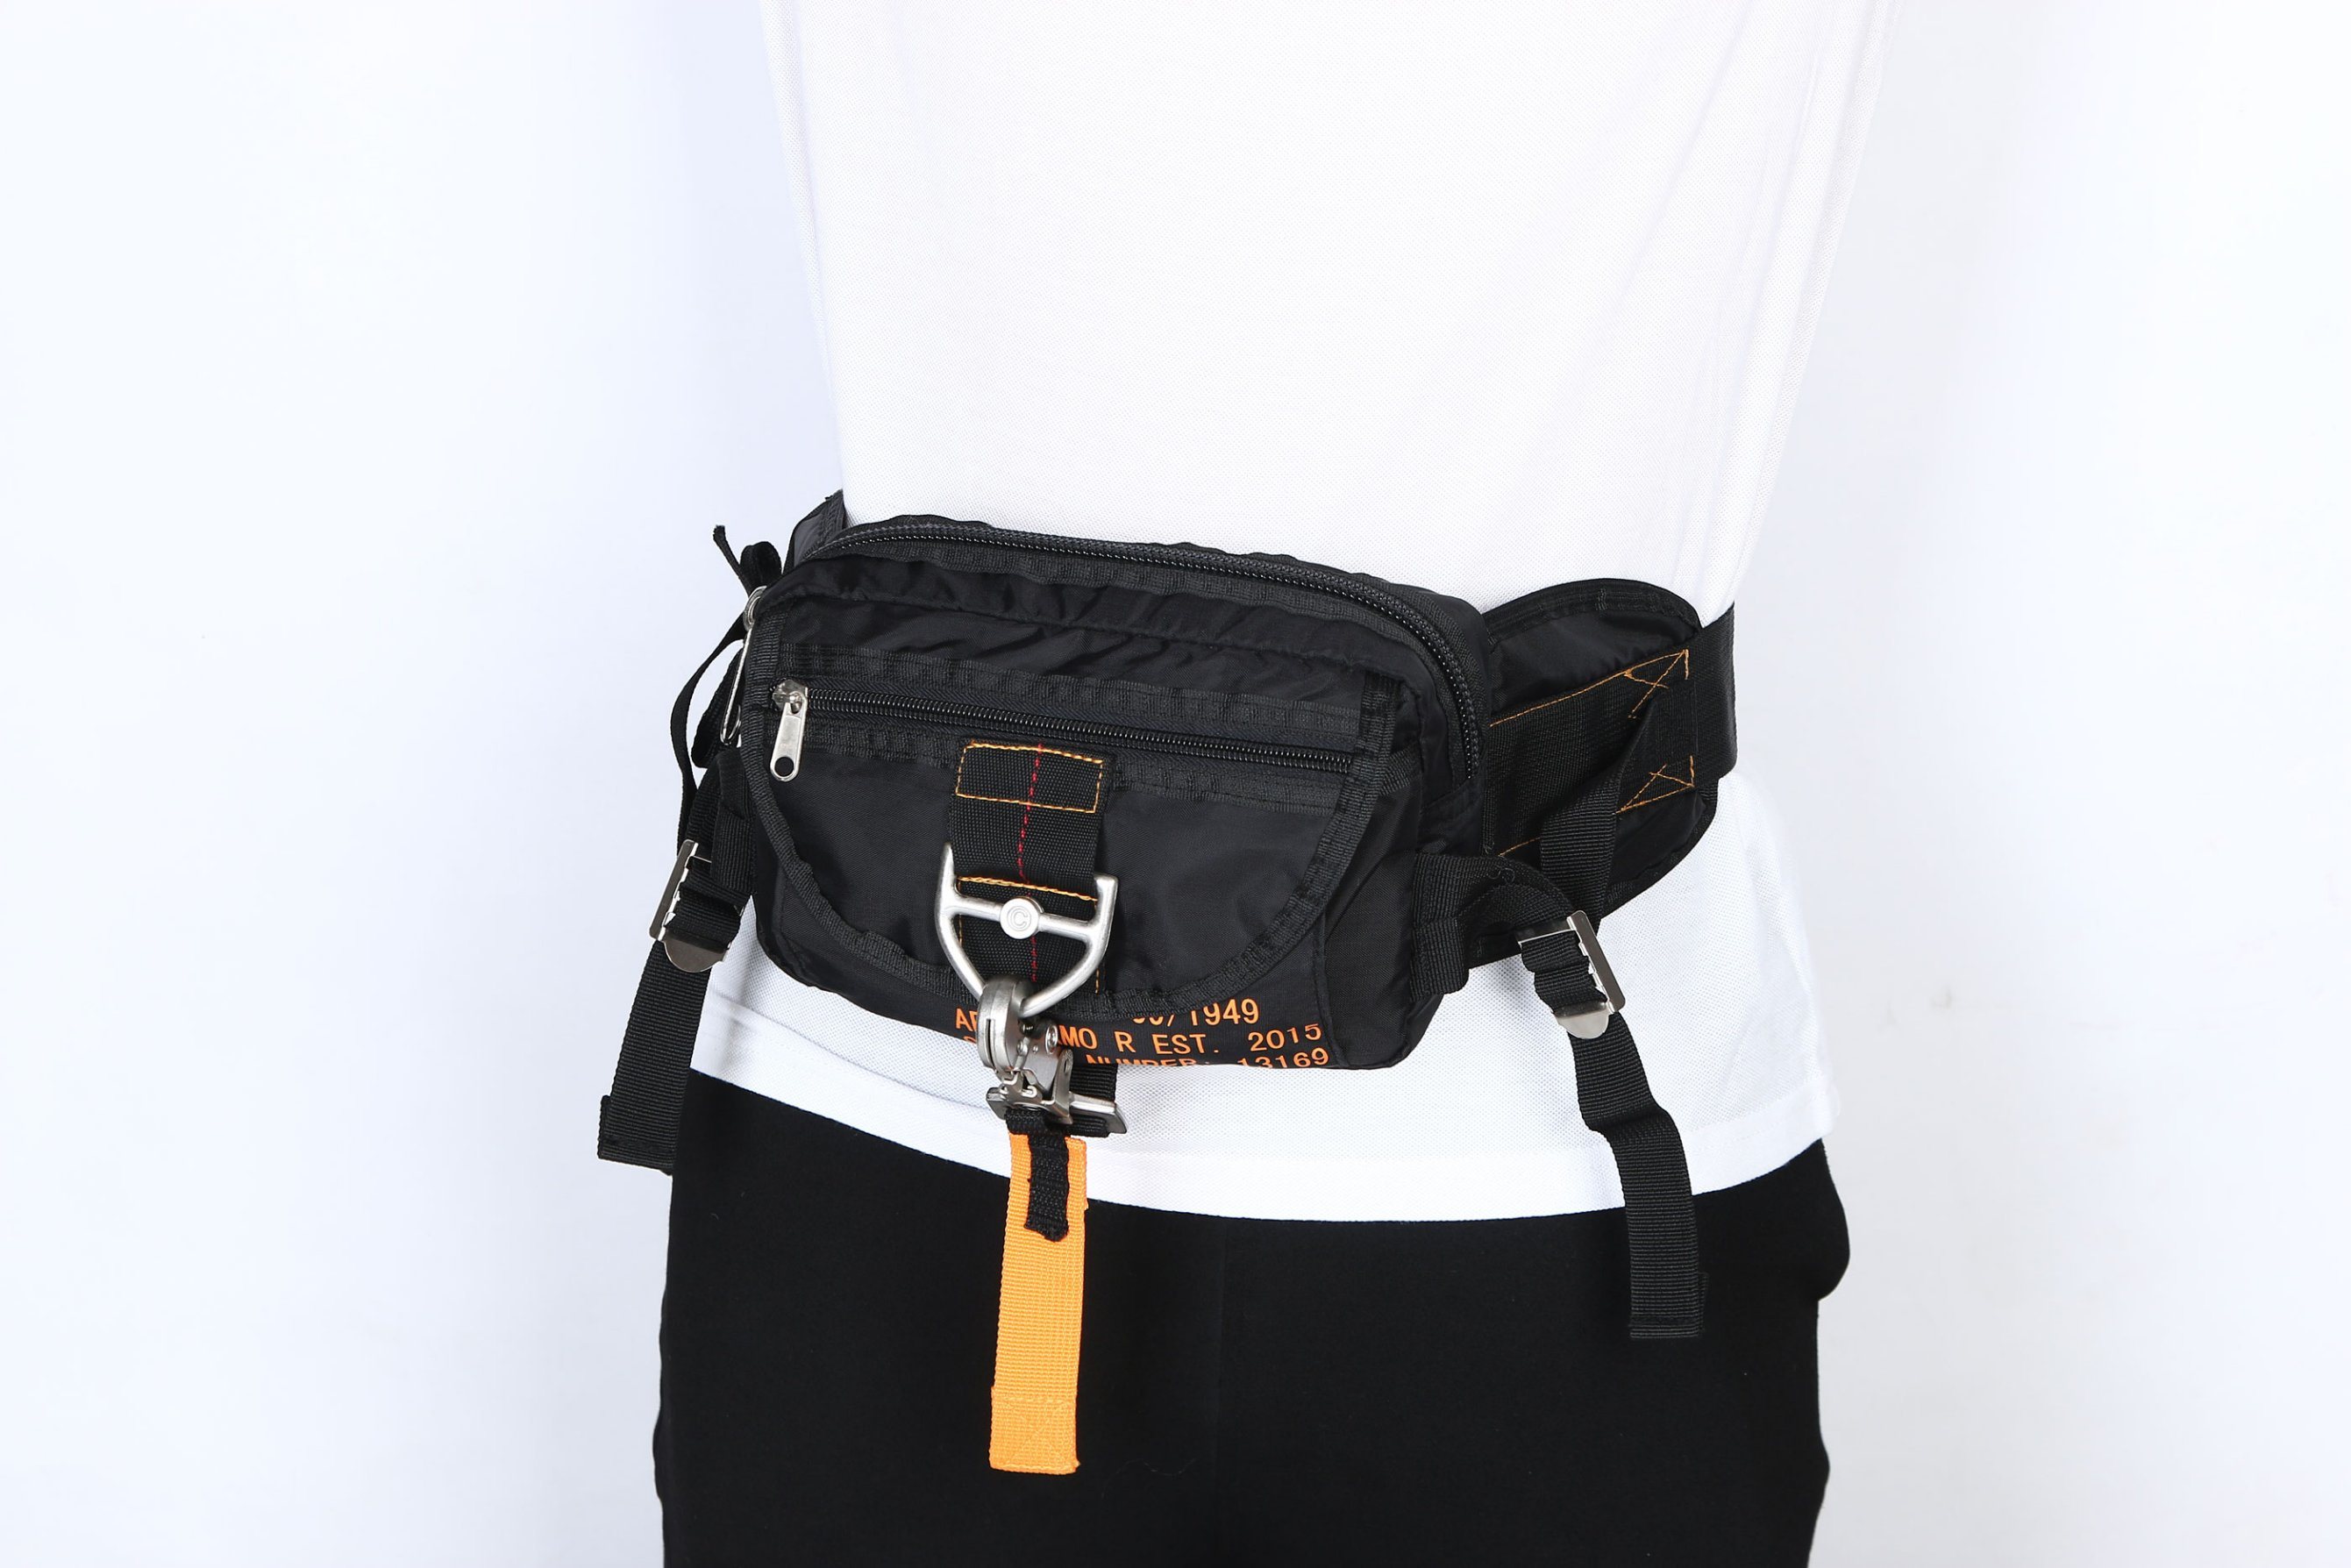 New Arrival in Stock Stylish Waterproof Military Tactical Parachute Waist Bag